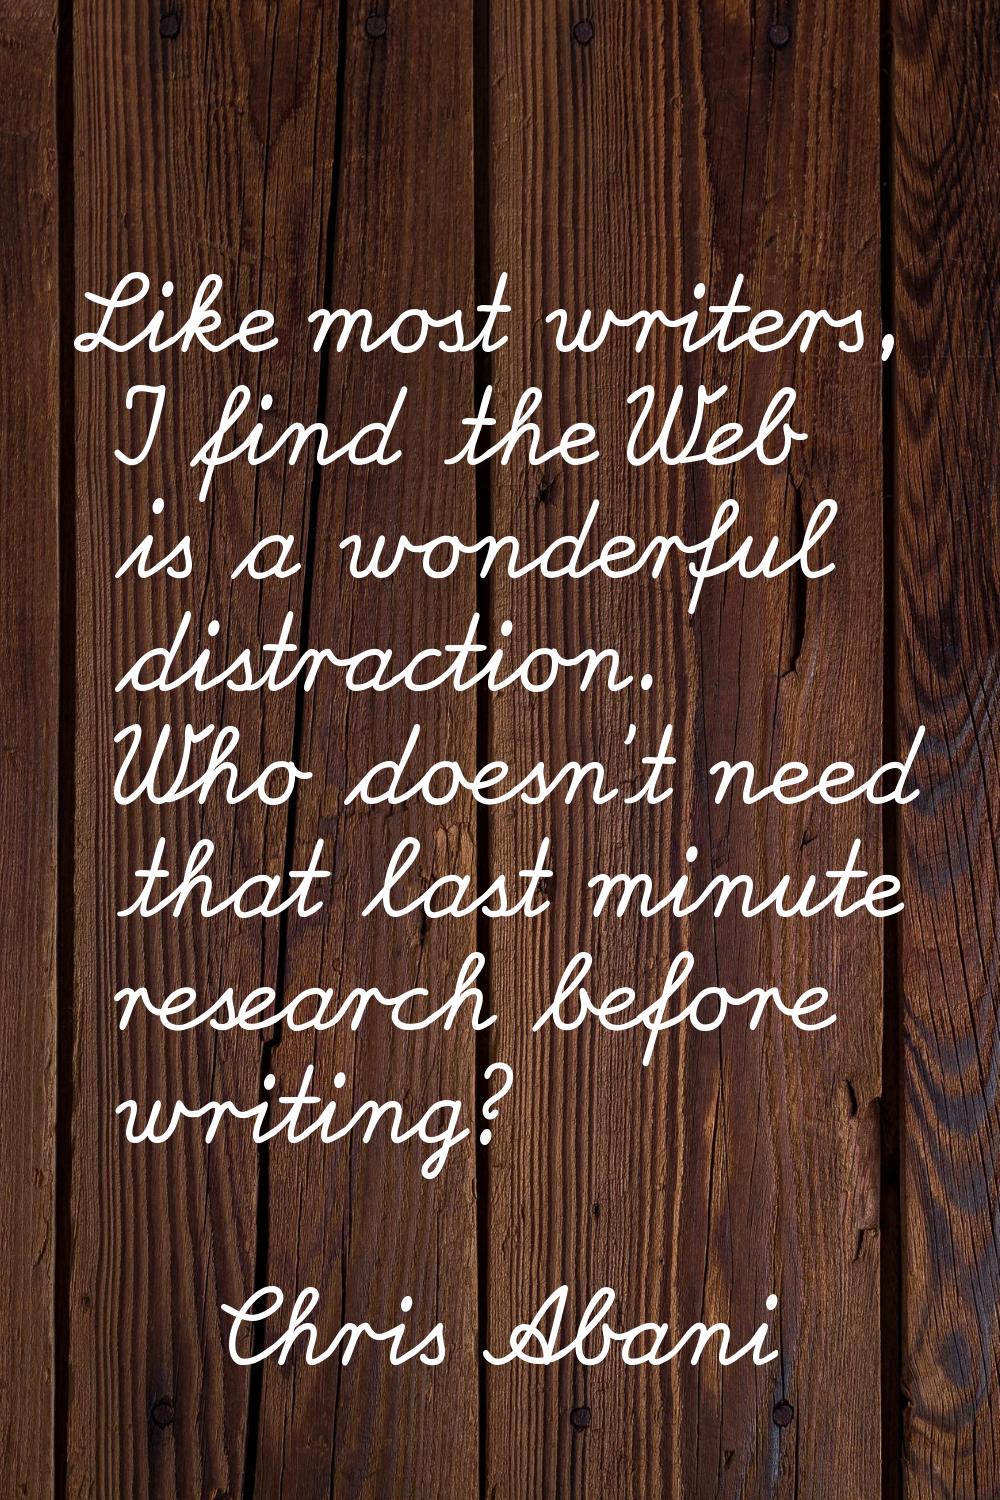 Like most writers, I find the Web is a wonderful distraction. Who doesn't need that last minute res